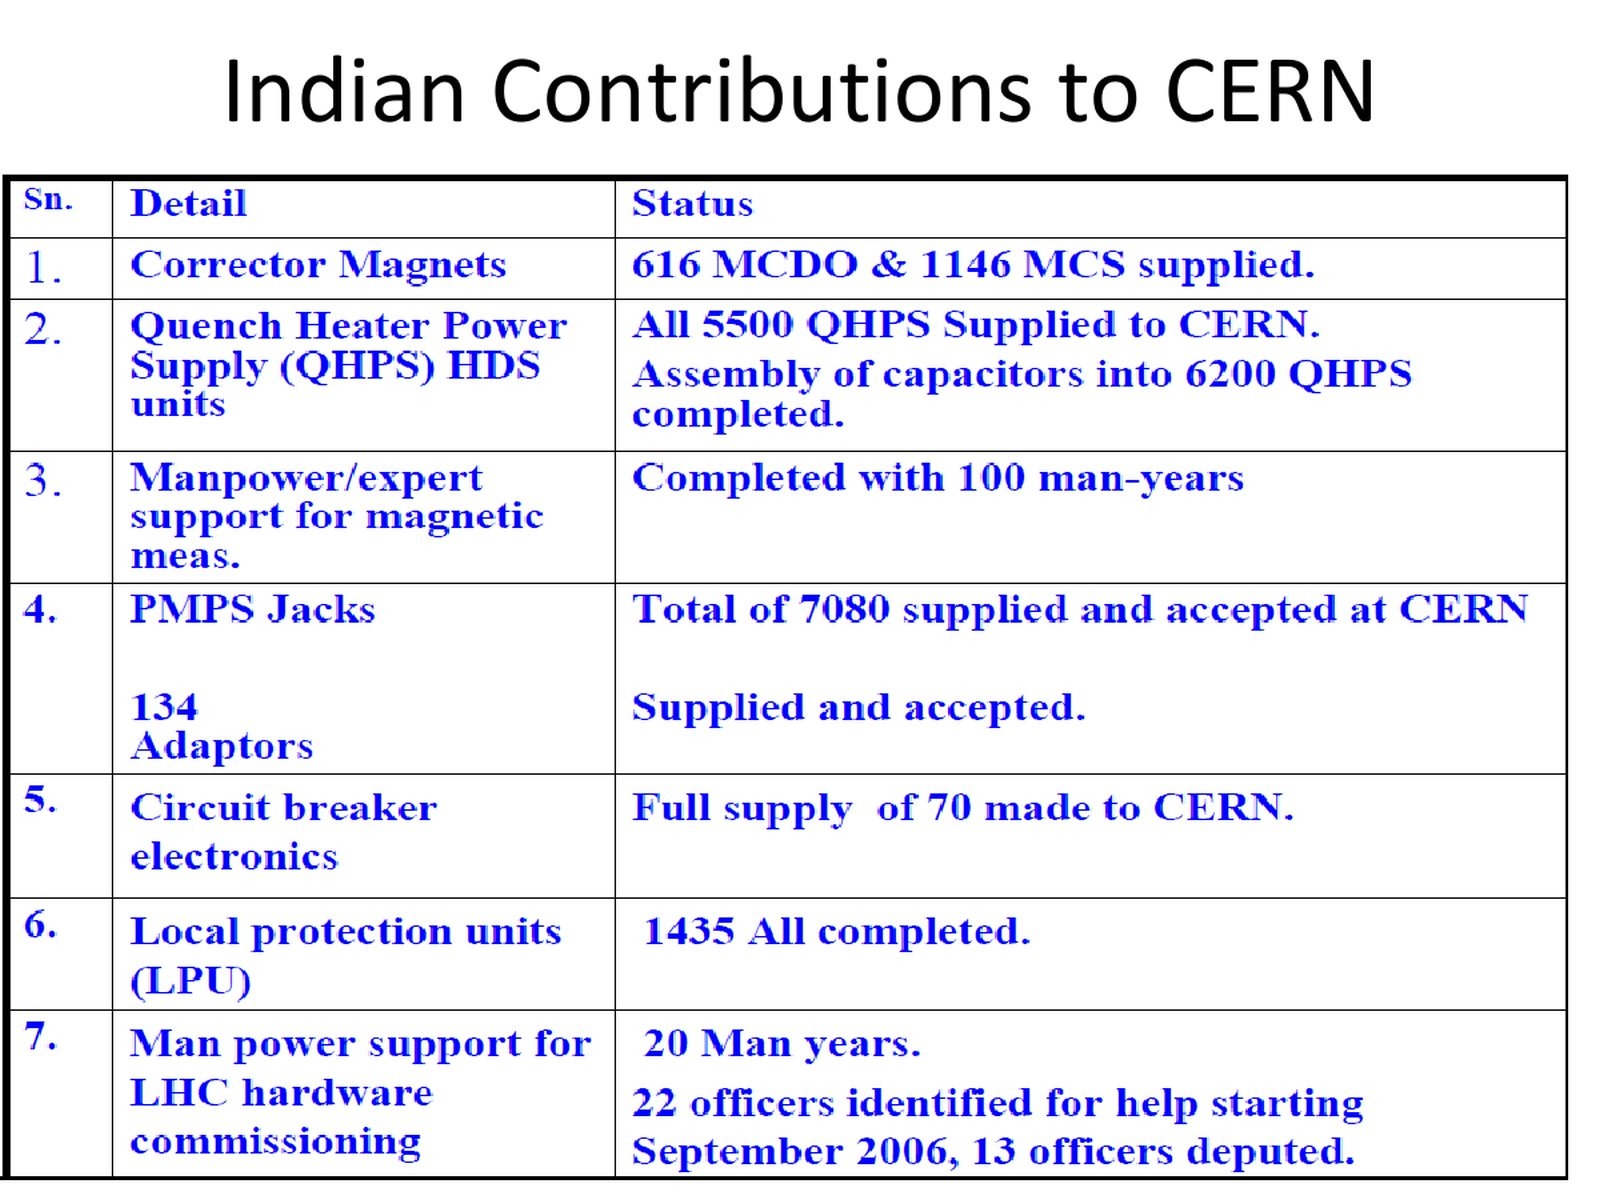 [Indian-Contribution-CERN-Research-Experiment%255B2%255D.jpg]